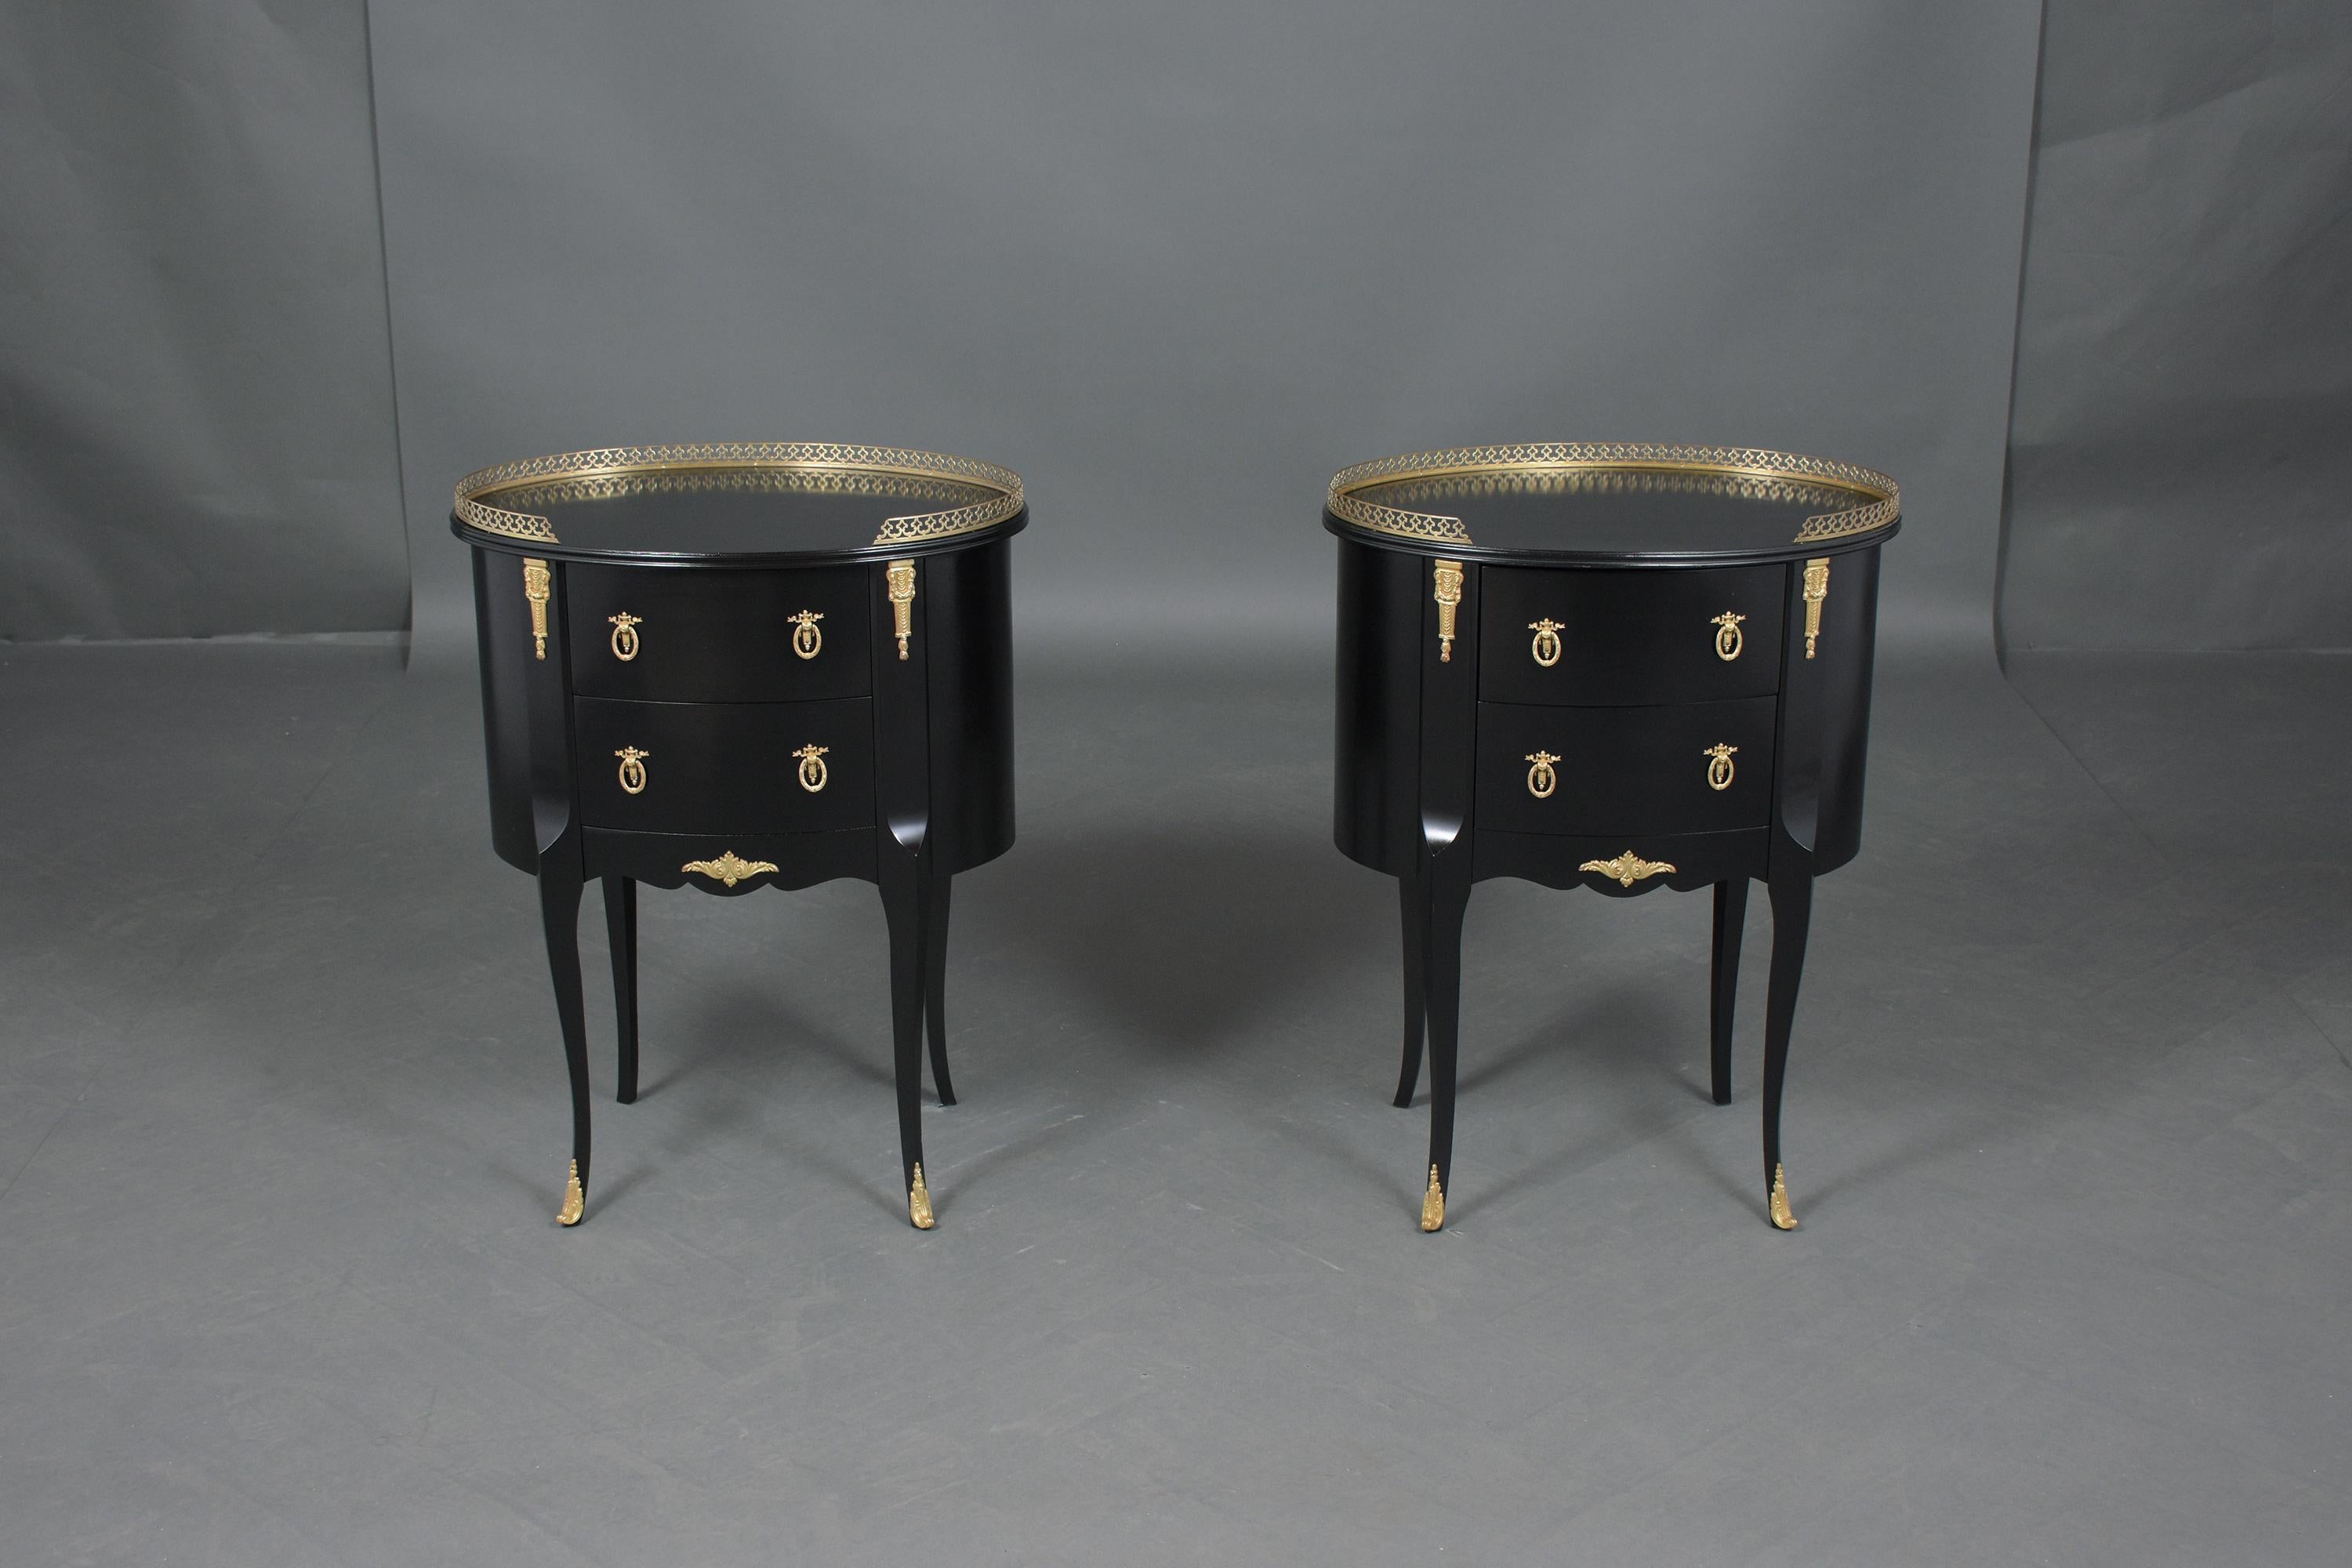 An extraordinary pair of early 1910s french commodes hand-crafted out of mahogany wood and this pair of side tables feature an elegant ebonized color with a lacquered finish. The oval shape tops have a brass gallery, and two pullout drawers each